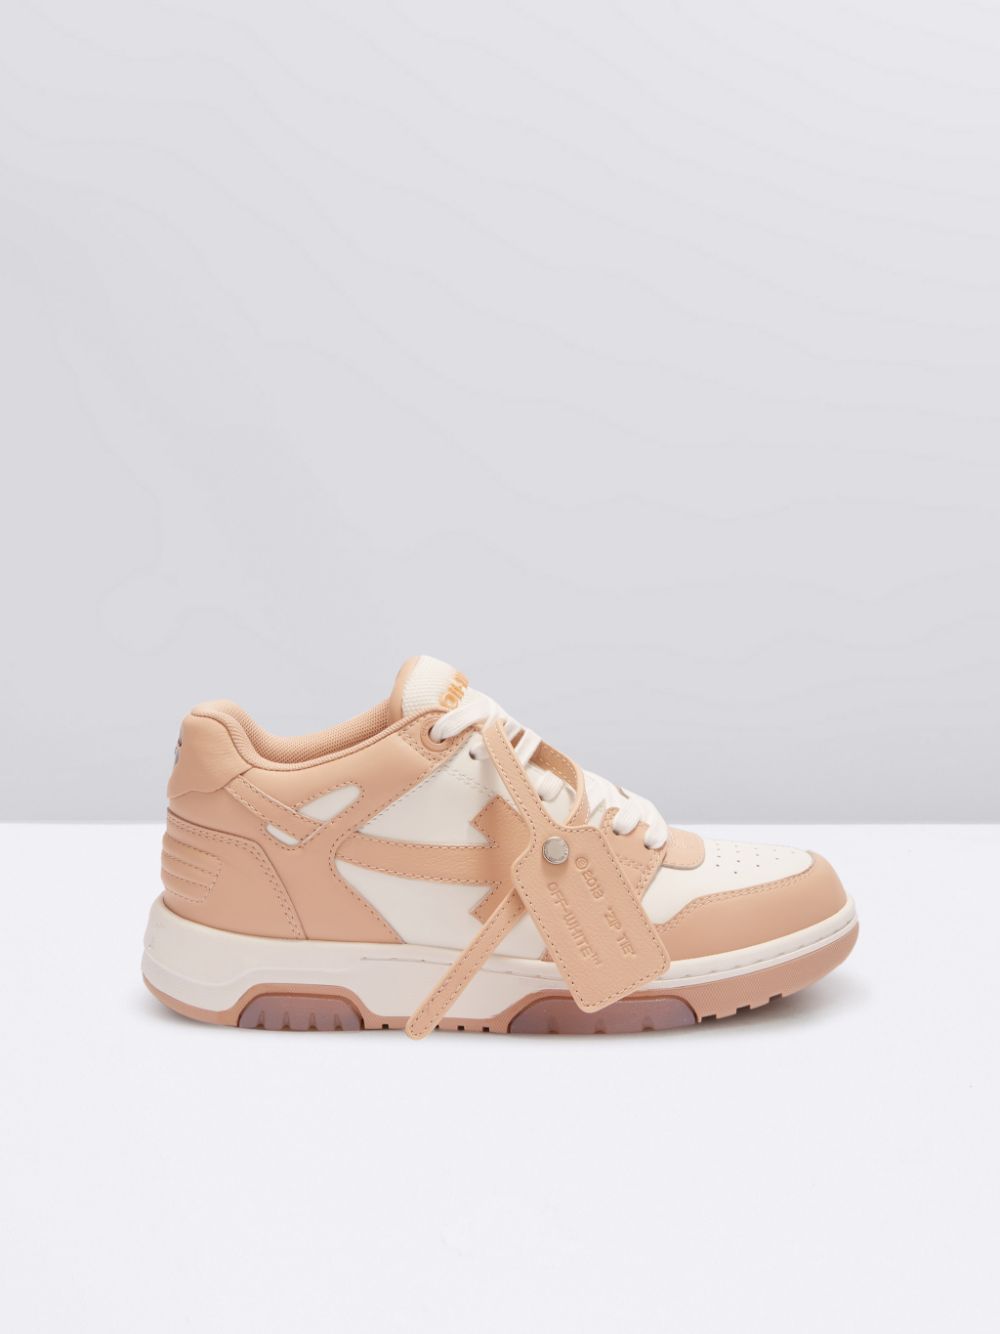 Off-White Out of Office Sneakers - Leather - White/Pink